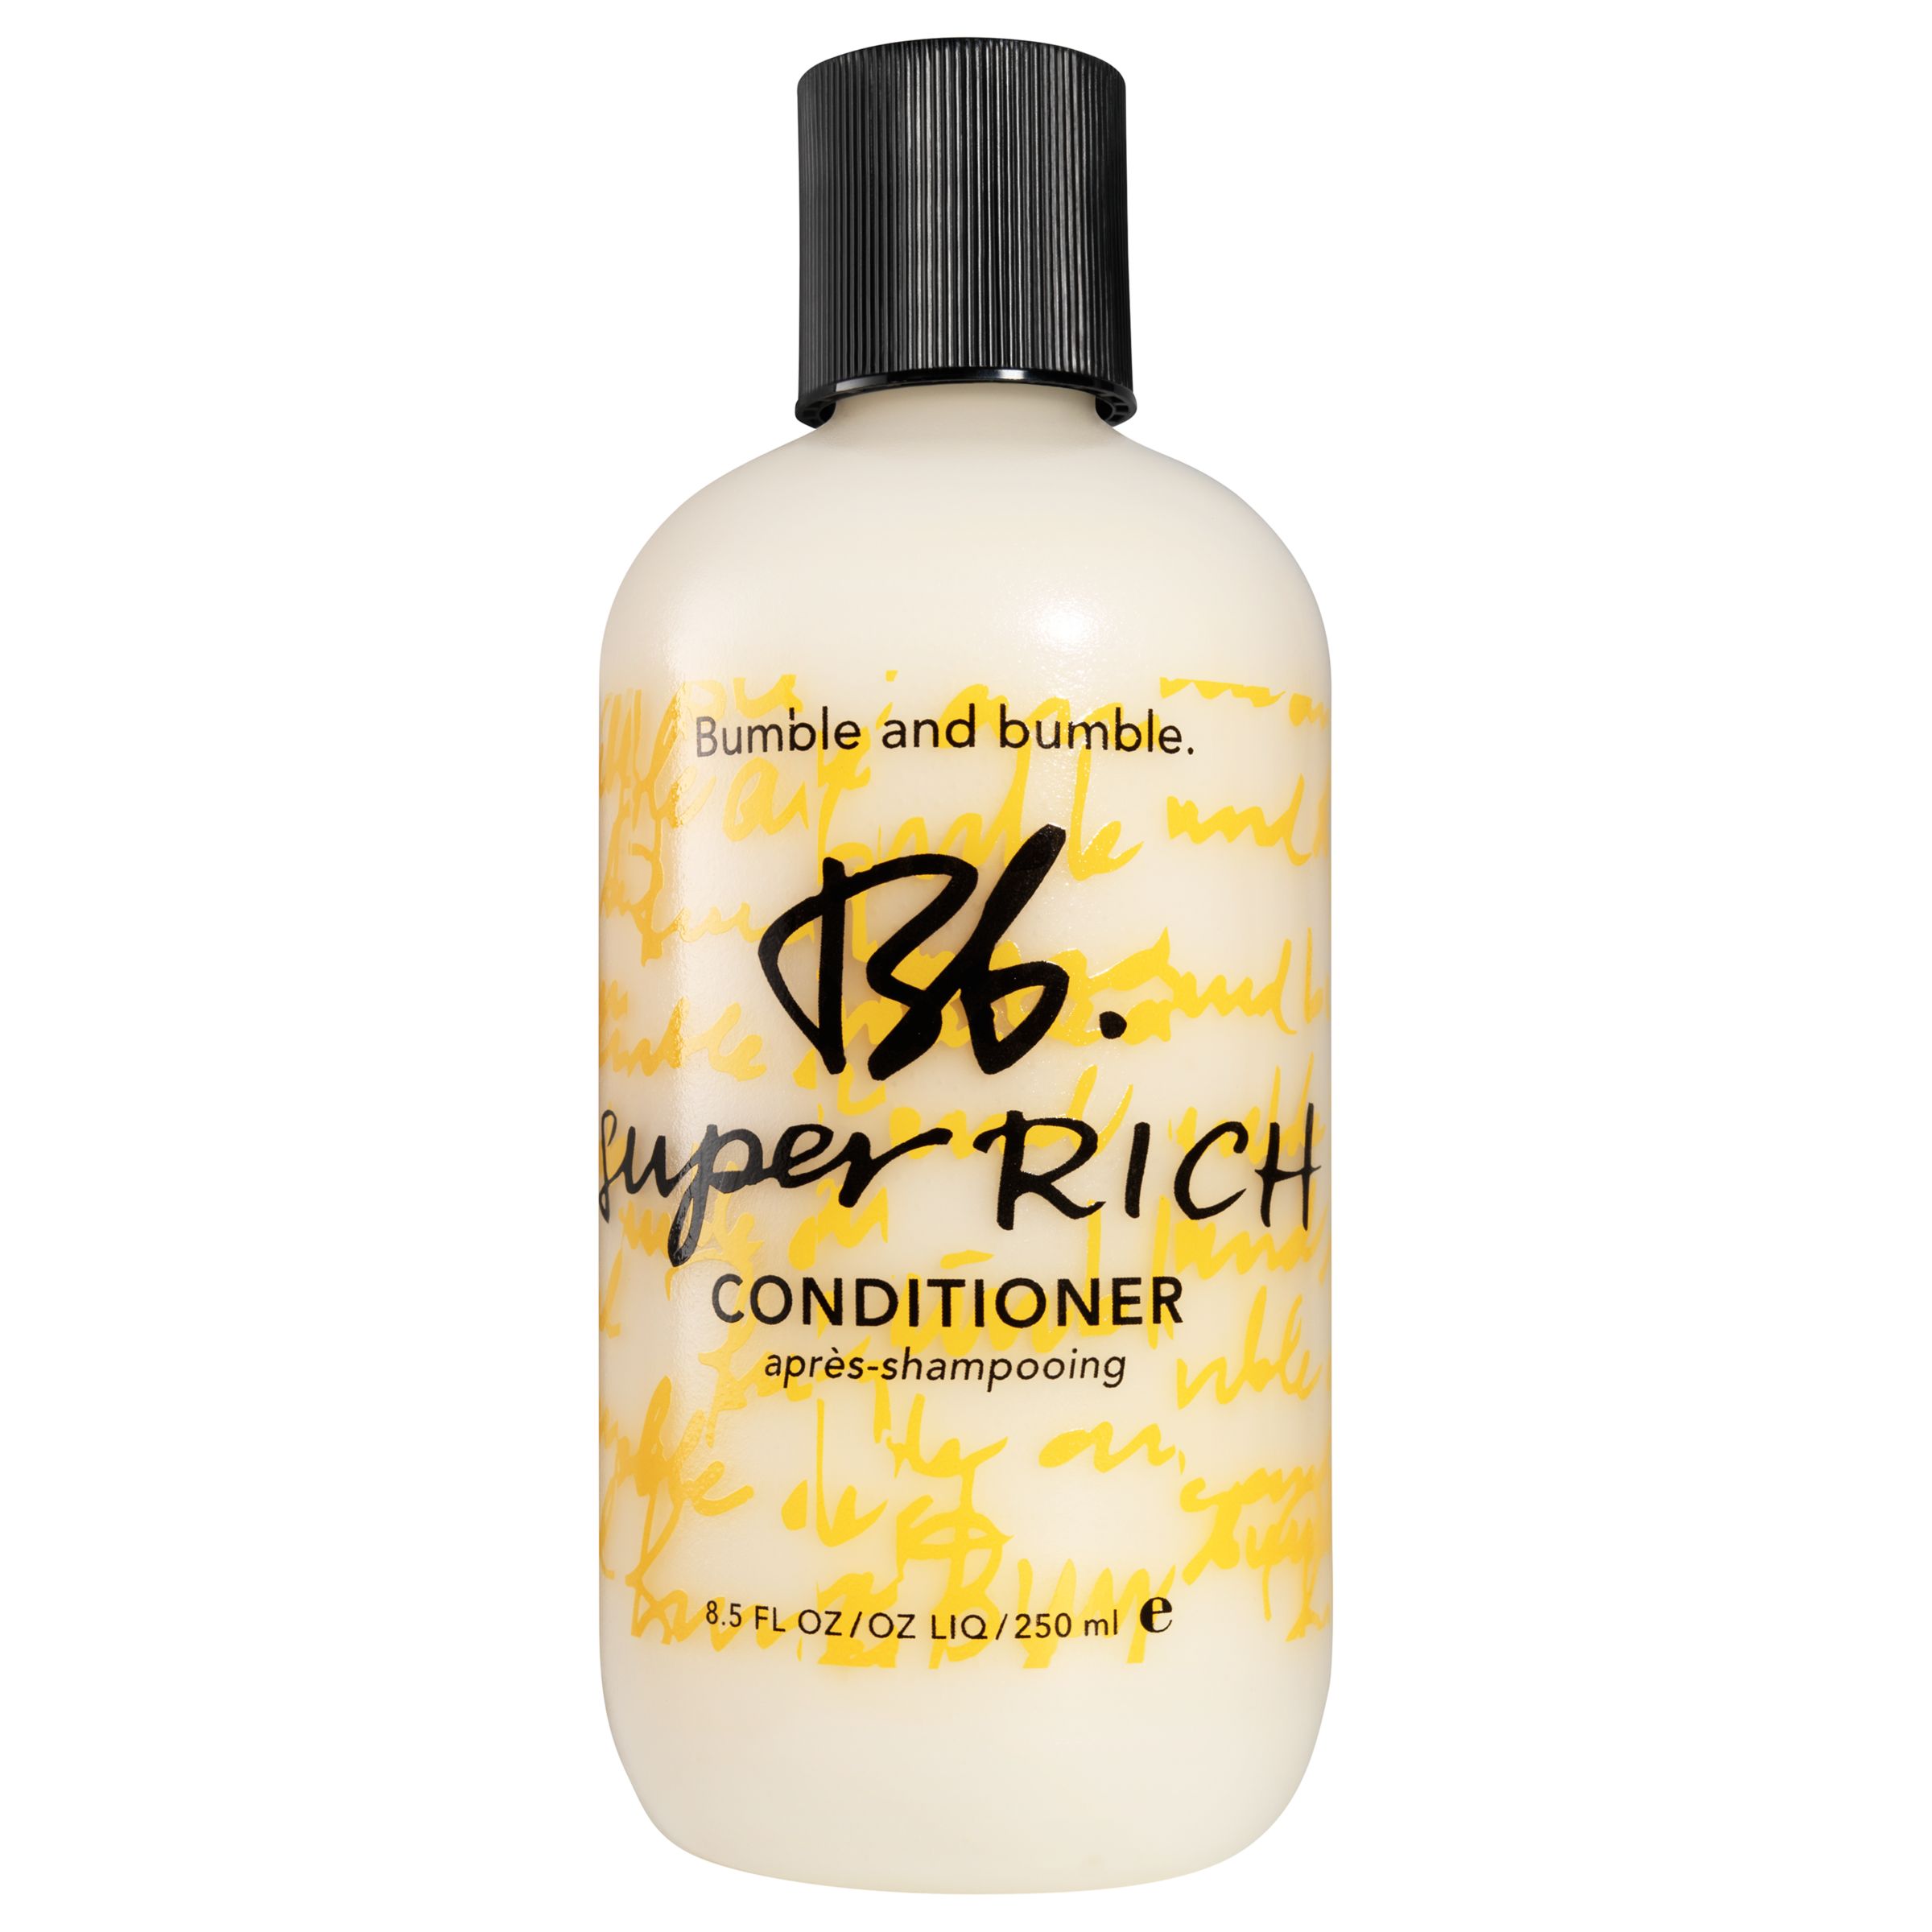 Bumble and bumble Super Rich Conditioner, 250ml 1